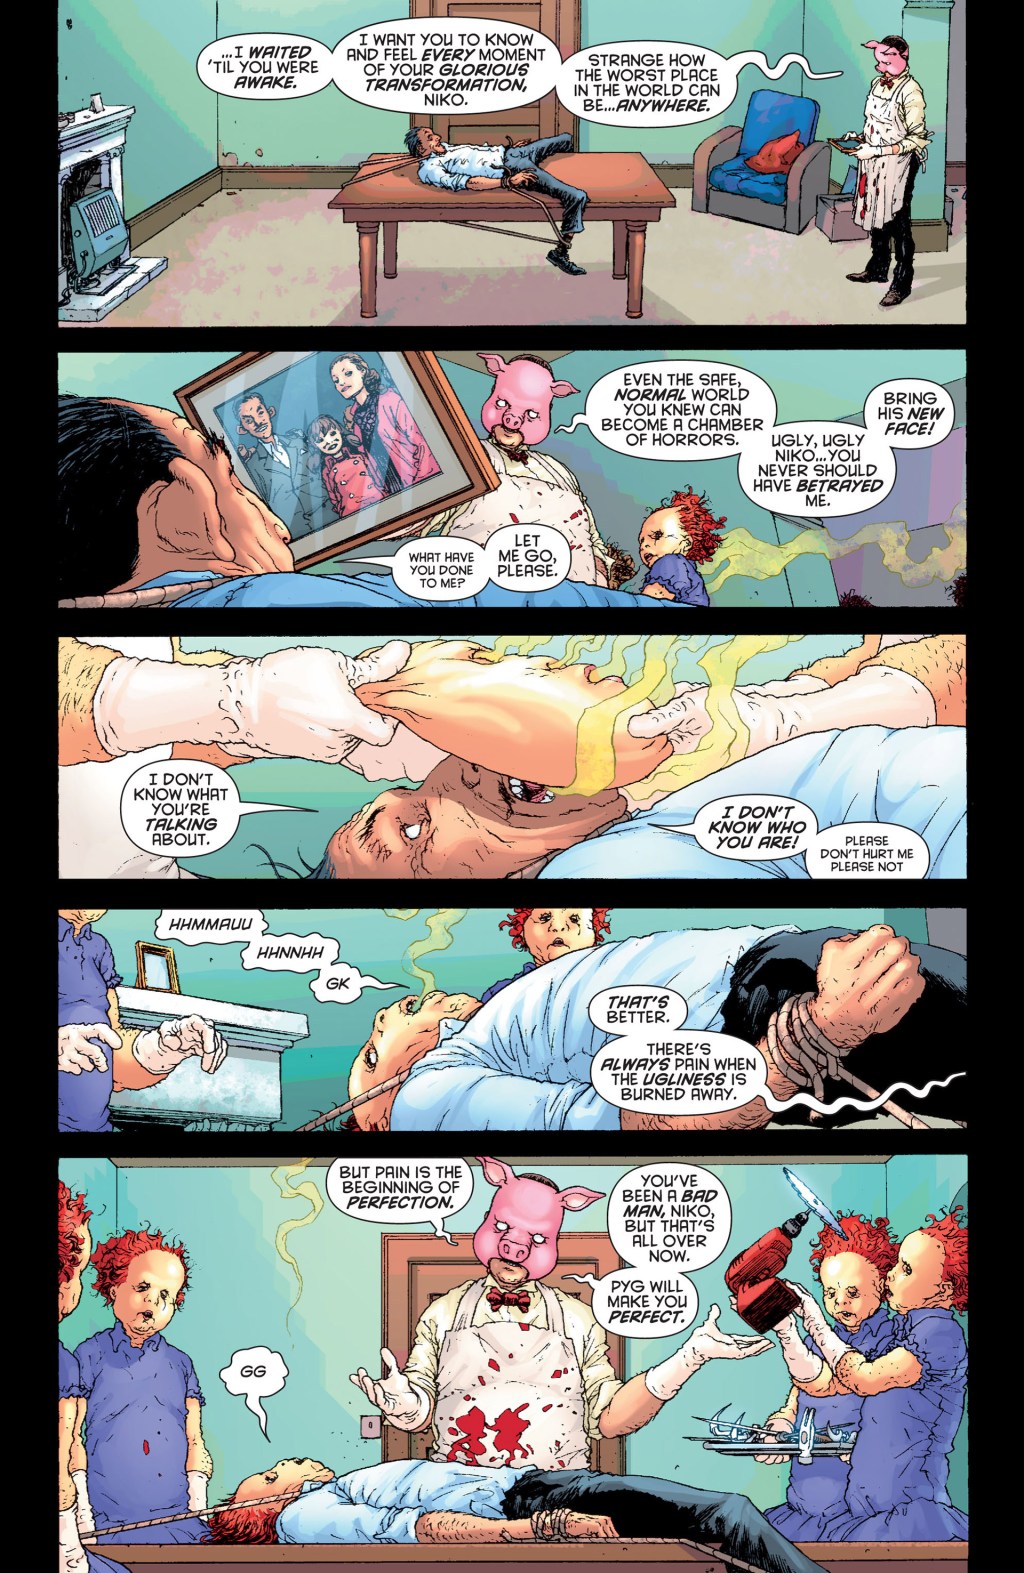 Professor Pyg embodies the mindset of 'cancel pigs' in Batman and Robin Vol. 1 #1 "Batman Reborn, Part One: Domino Effect" (2009), DC. Words by Grant Morrison, art by Frank Quitely, Alex Sinclair, and Pat Brosseau.